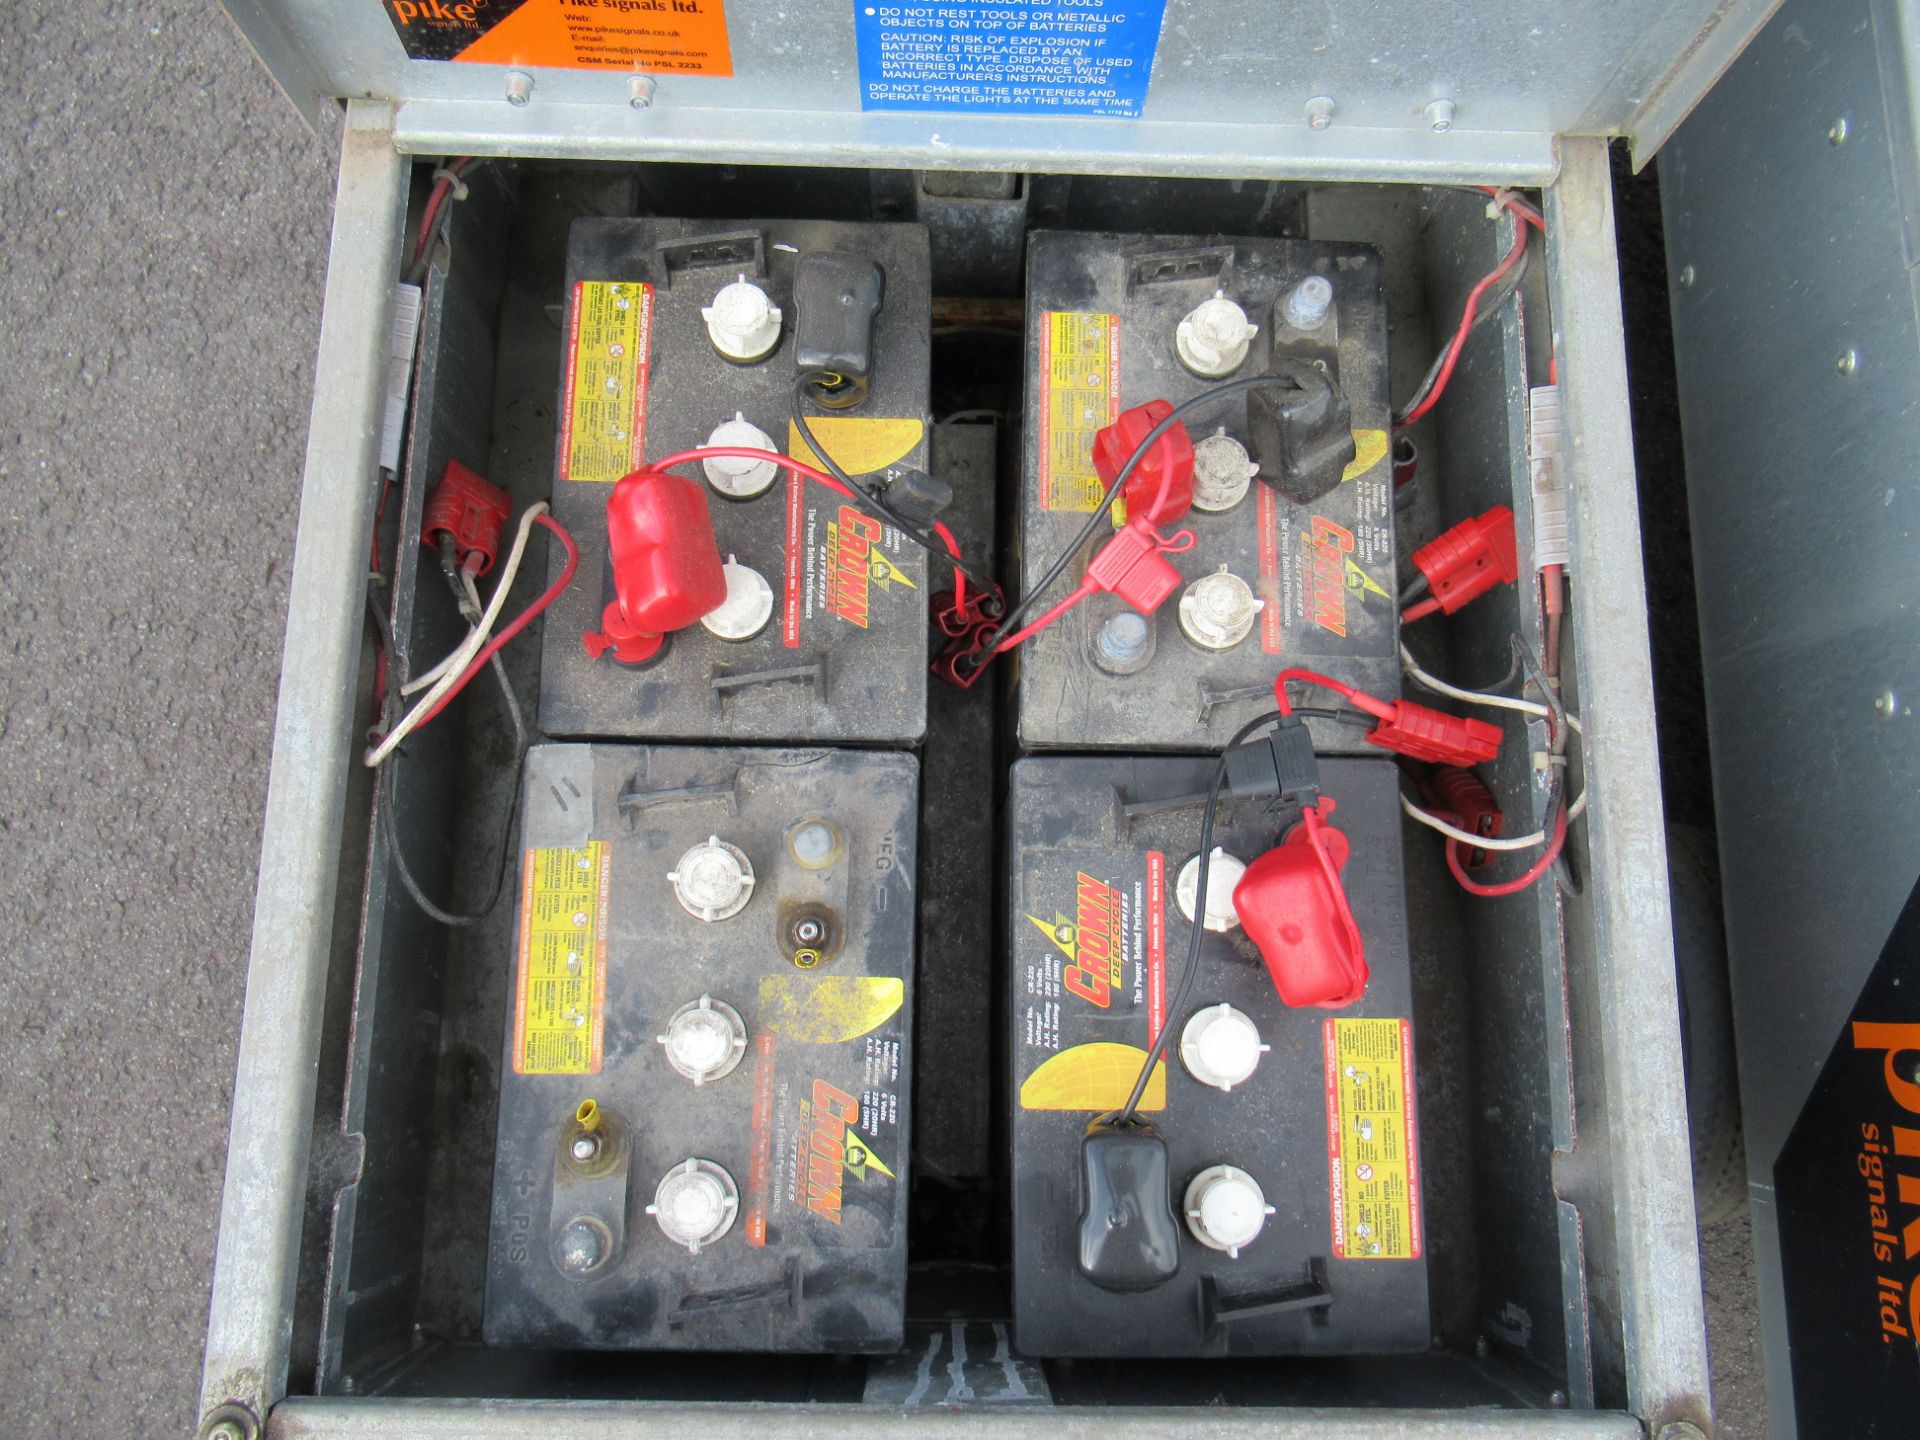 A Pair of Pike Signals Ltd "Pedestrian" Battery Powered Portable Light Units - Image 7 of 7